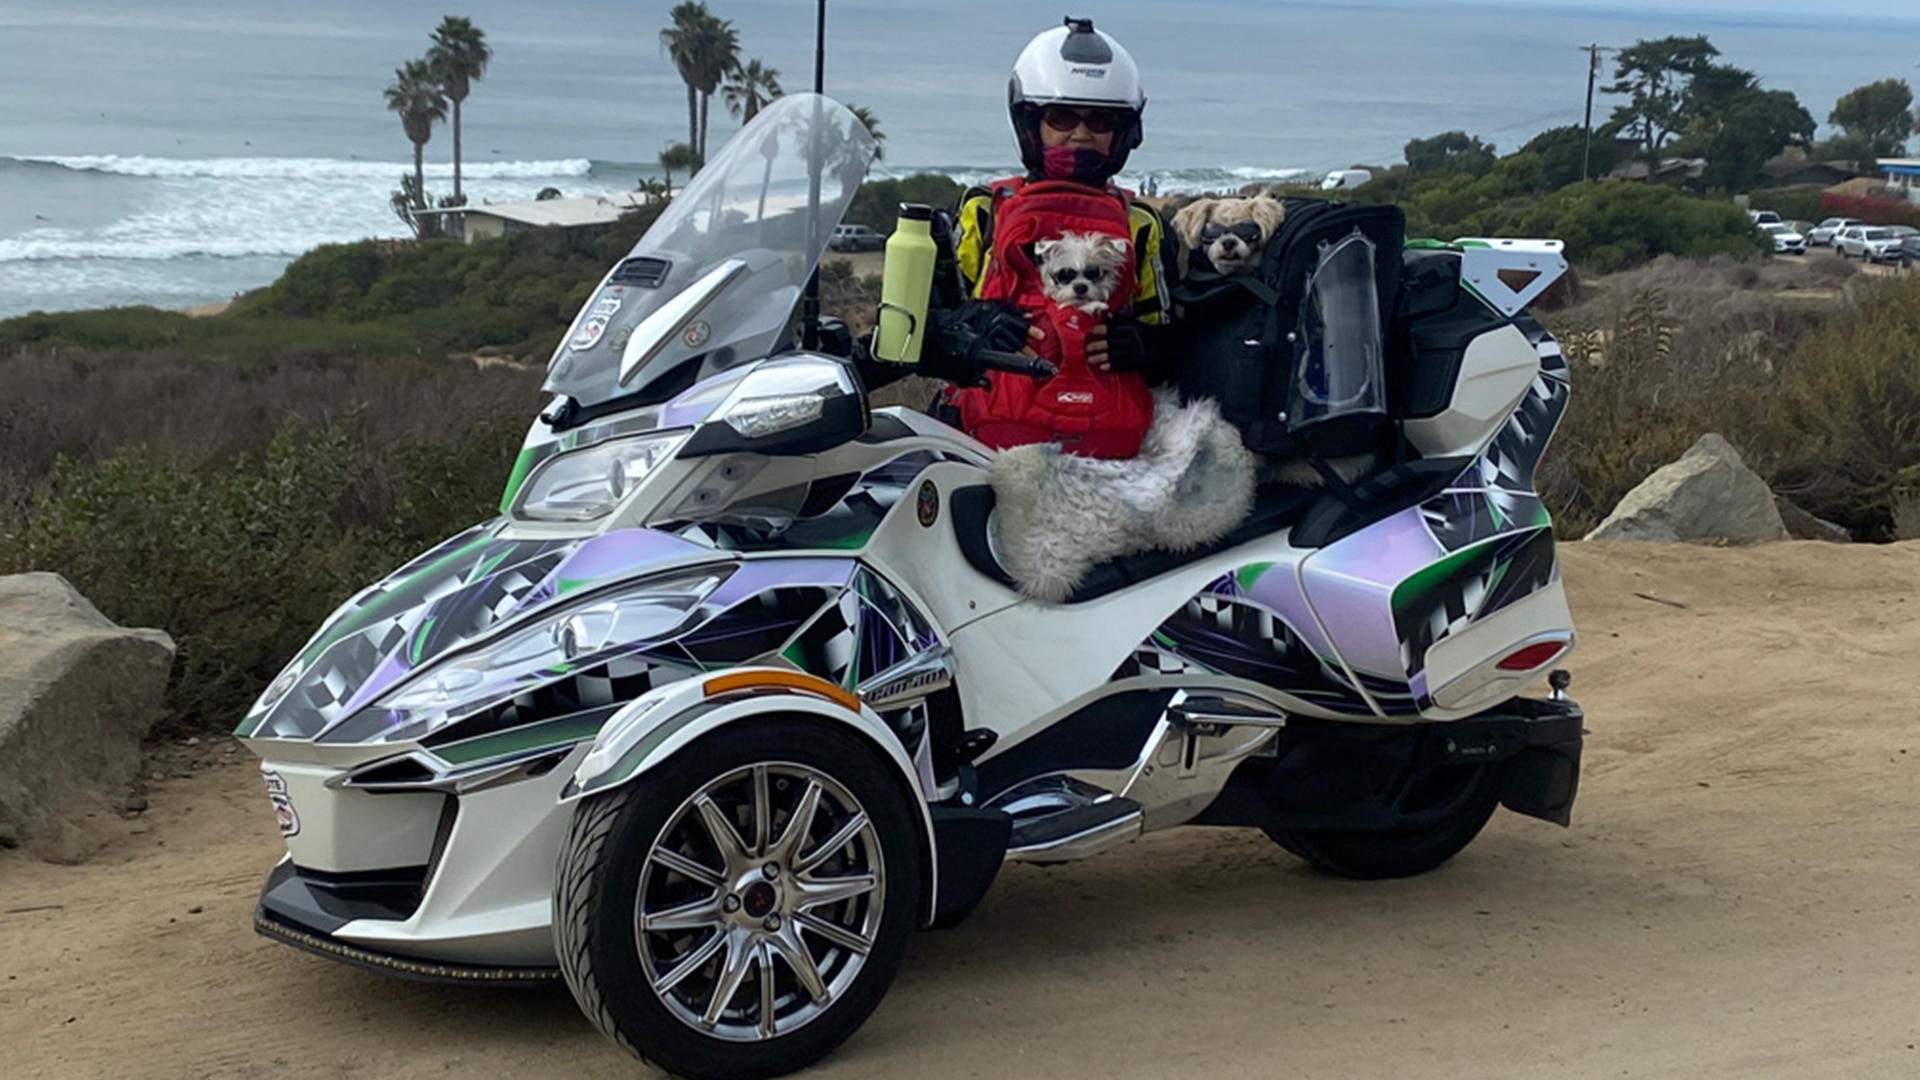 On-Road ambassador Mihee Olsen about to on a ride on her Spyder RT with her dogs